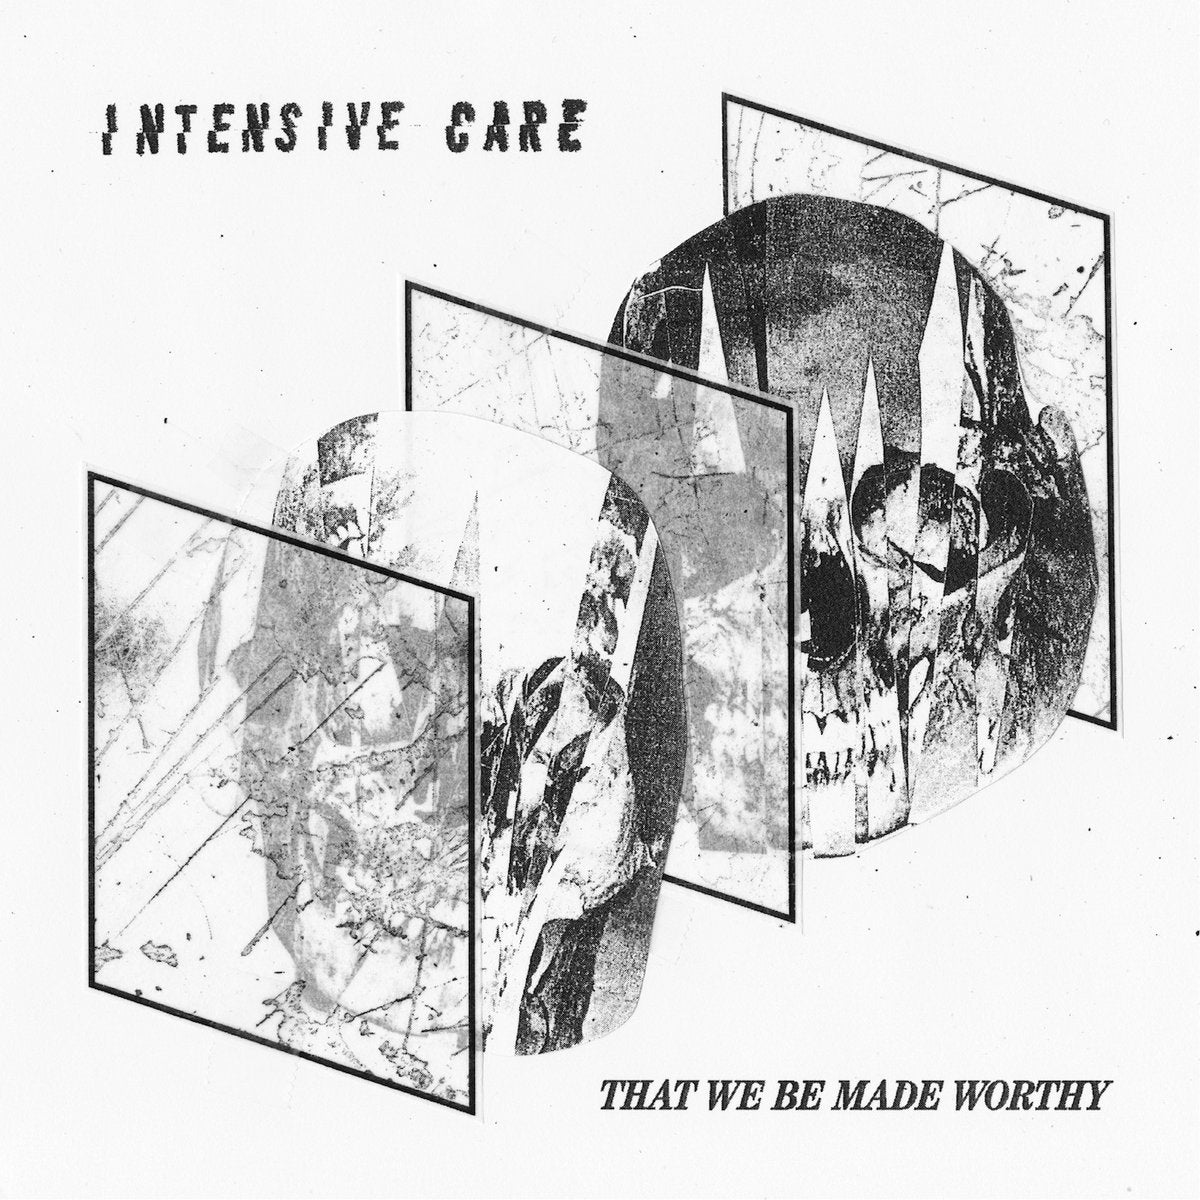 Intensive Care "That We Be Made Worthy" 12" Vinyl